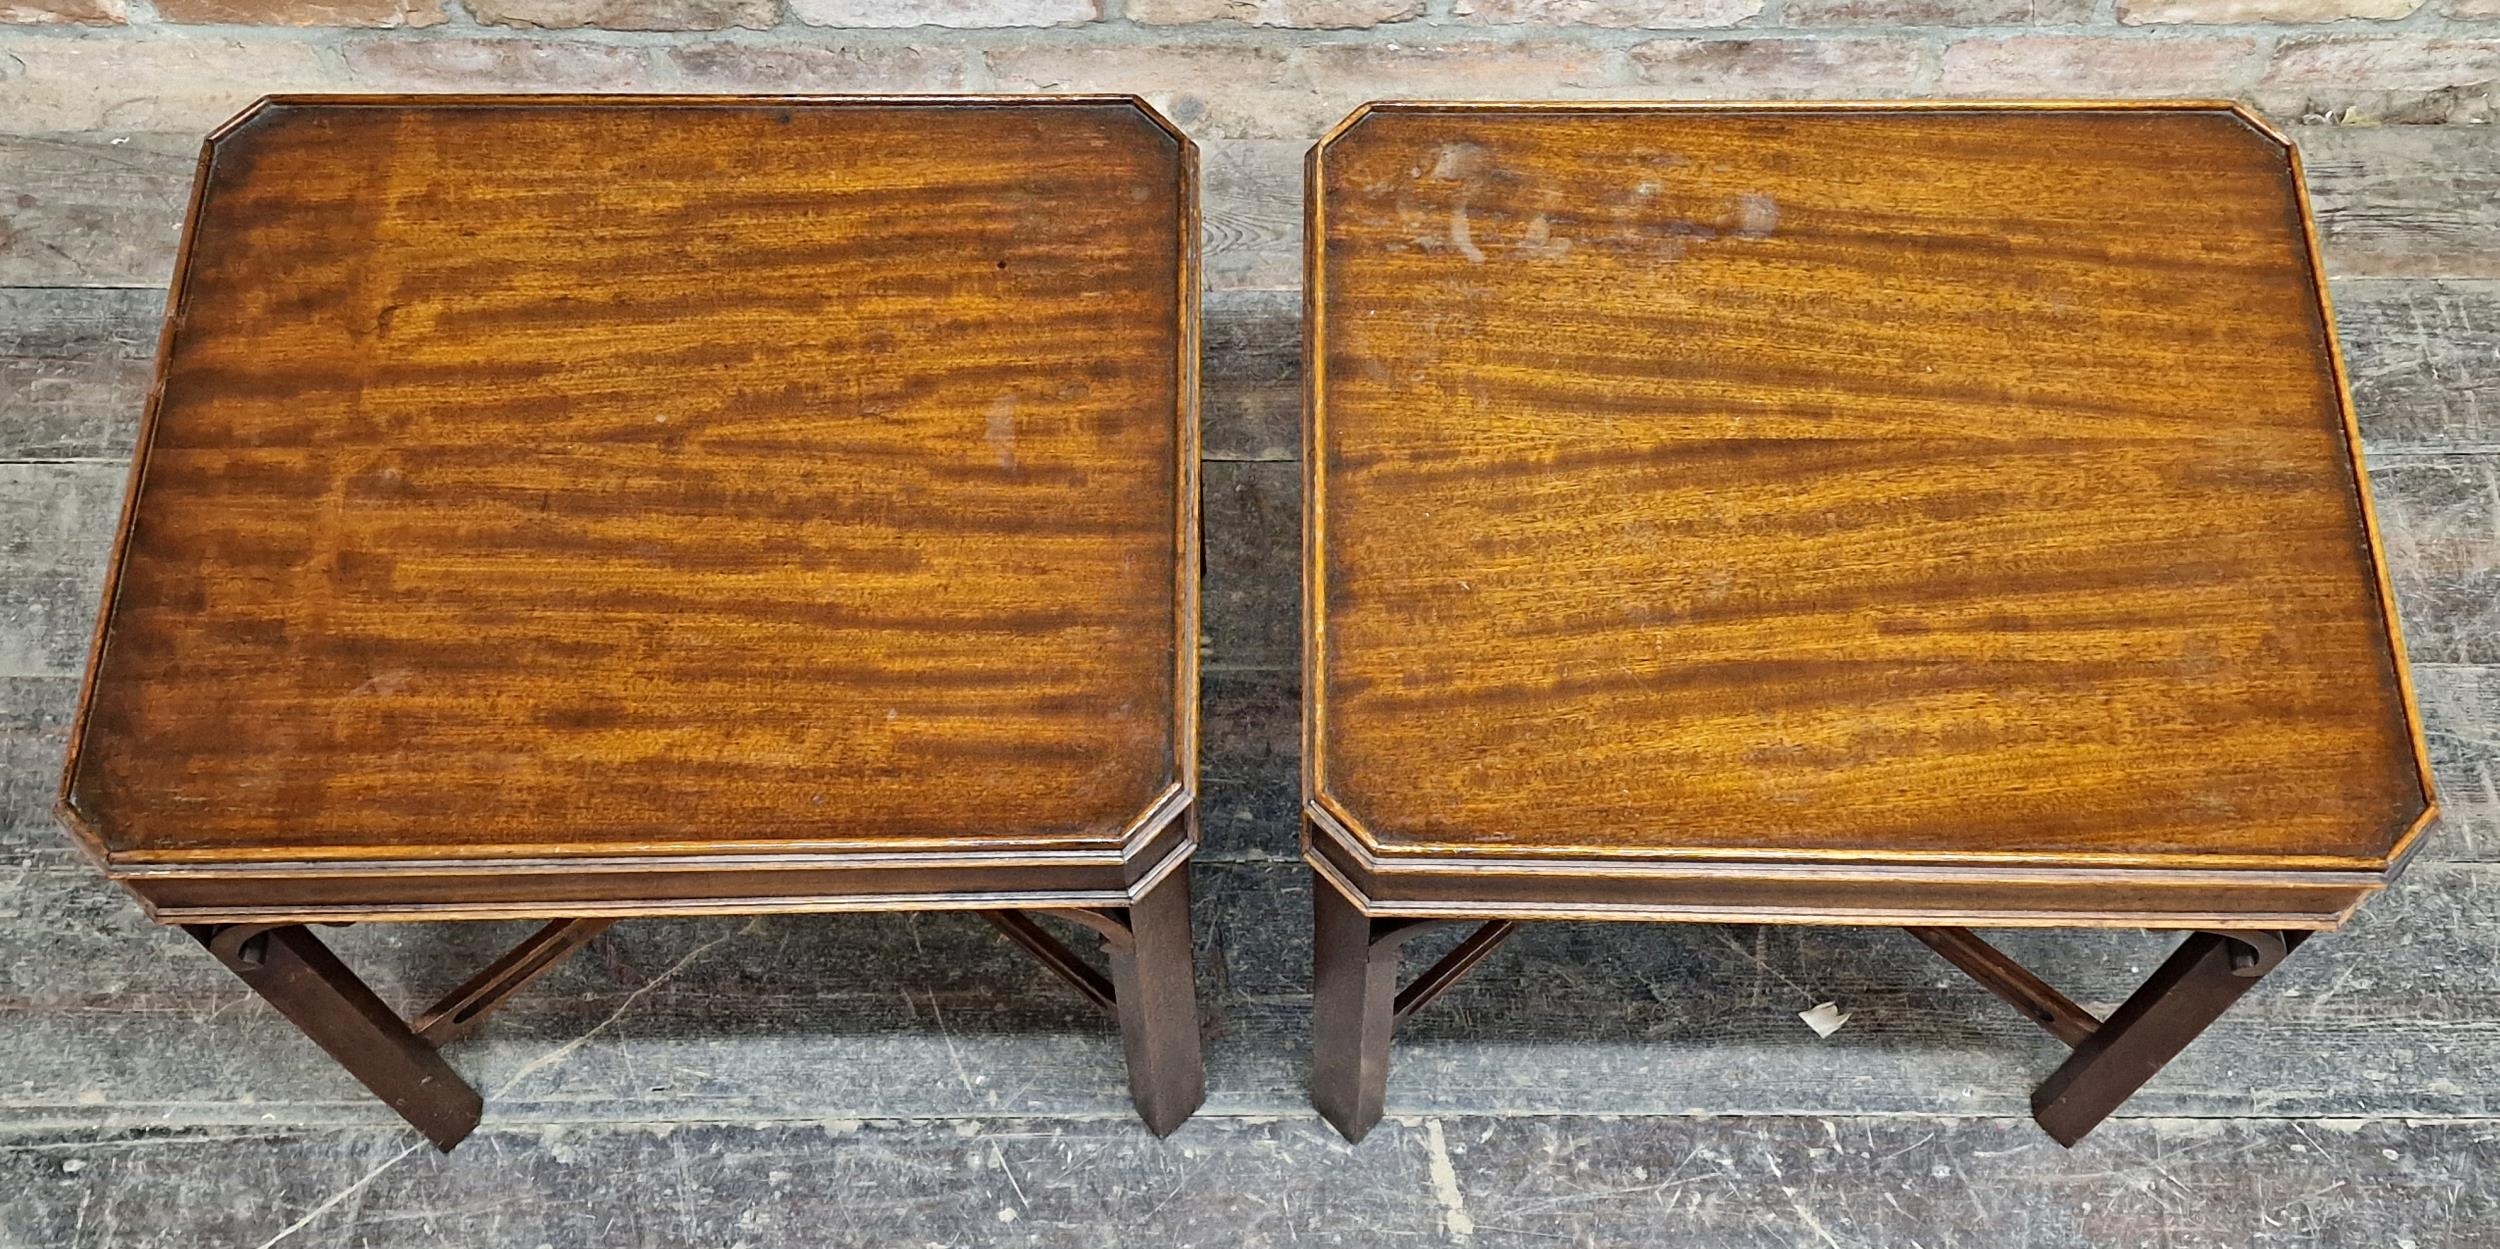 Pair of Chippendale style mahogany silver tables, H 56cm x W 52cm x D 43cm (2) - Image 3 of 3